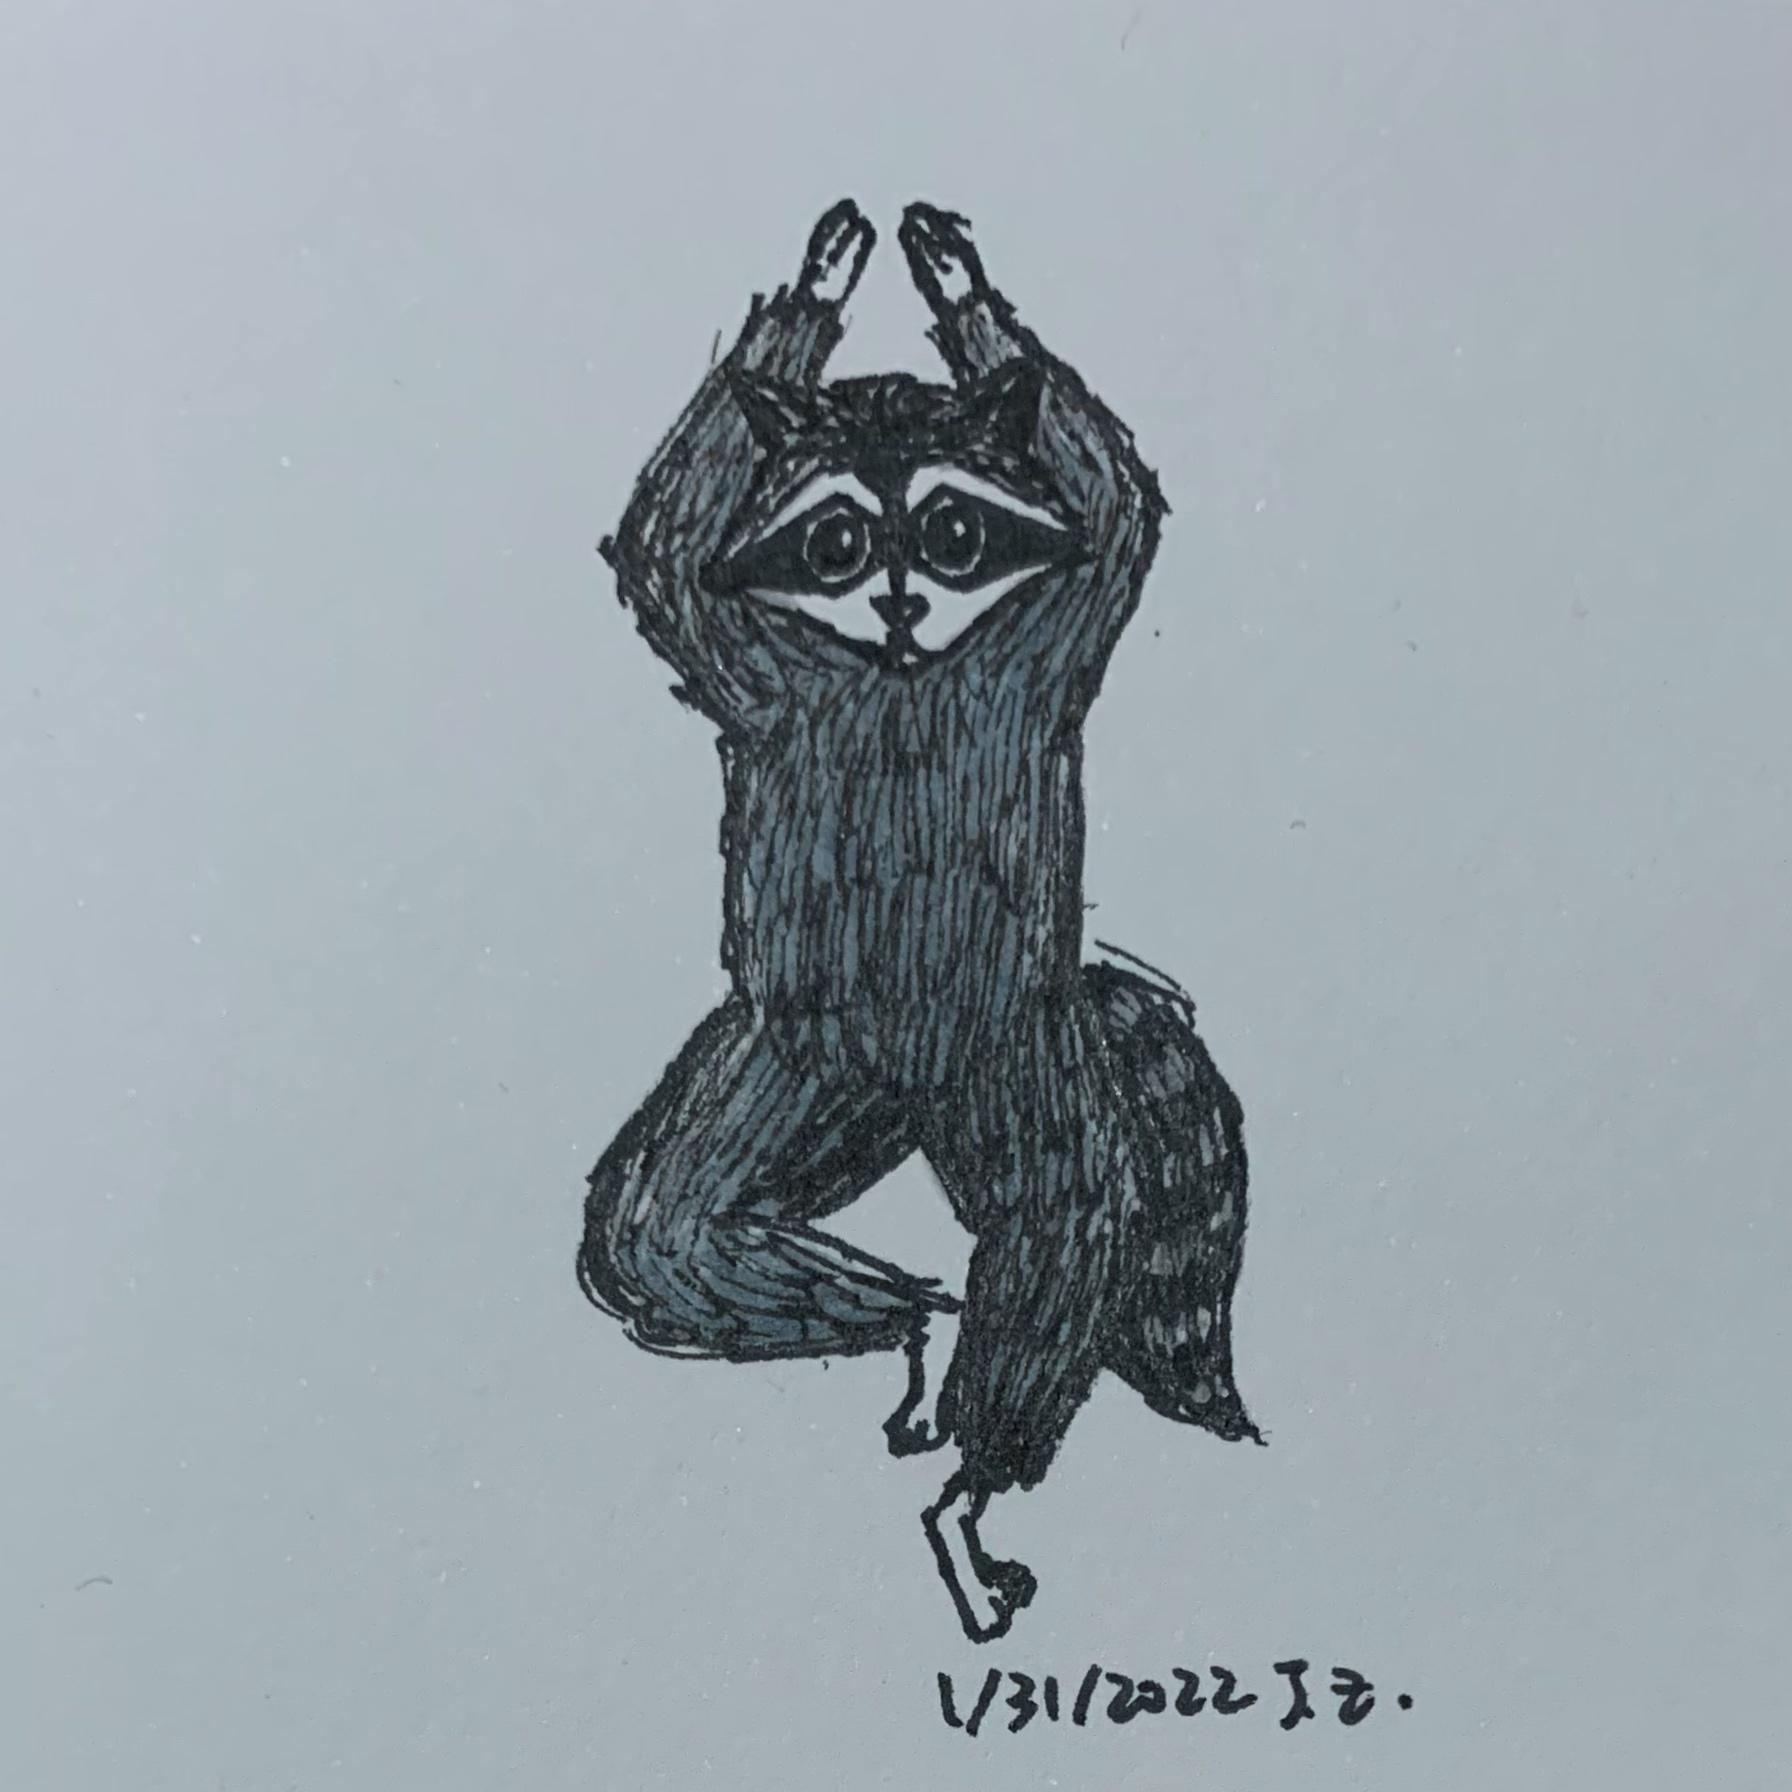 Raccoon does yoga (tree pose) 1/31/2022 Sketchdaily